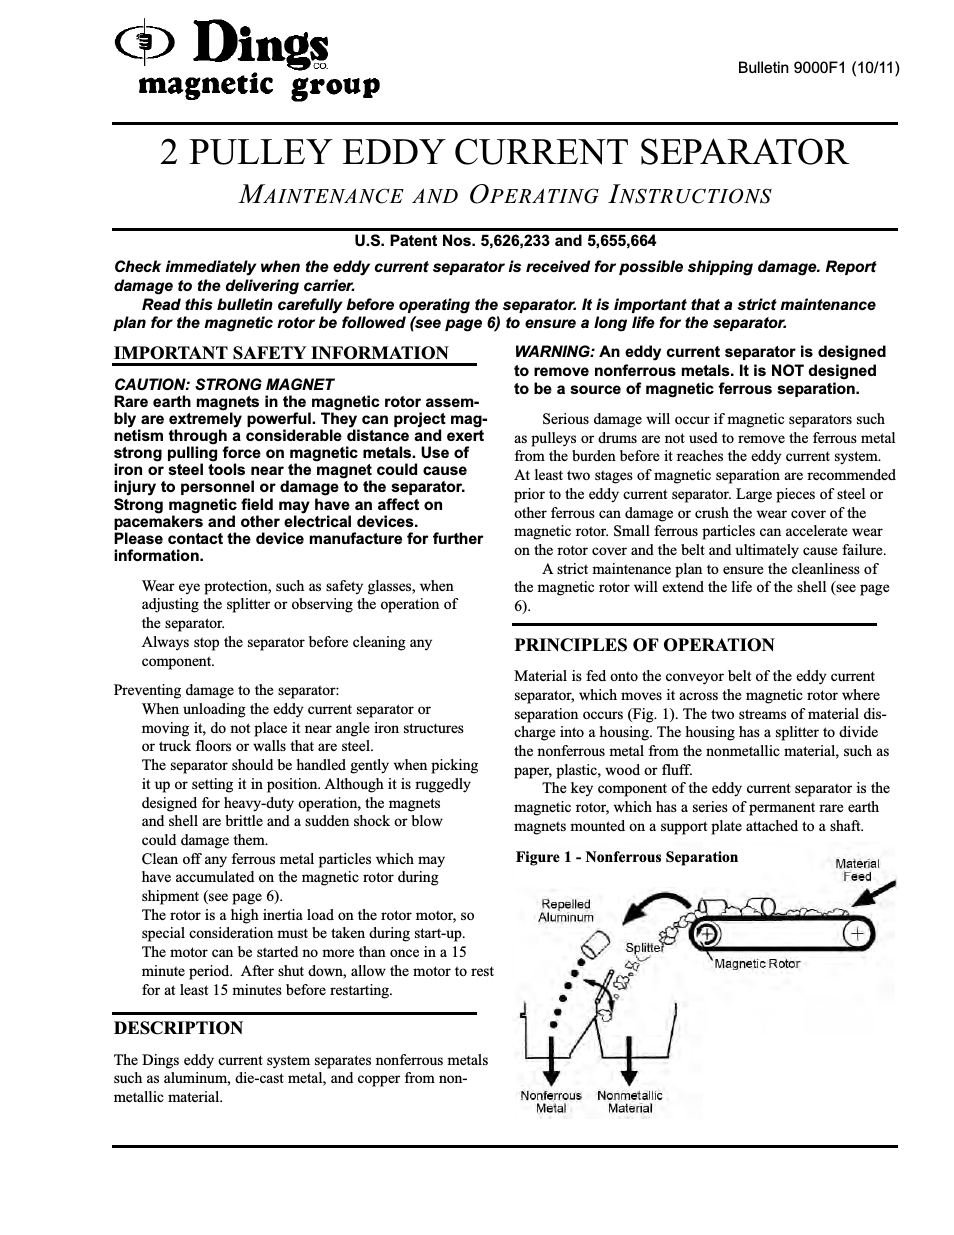 2 PULLEY EDDY CURRENT SEPARATOR